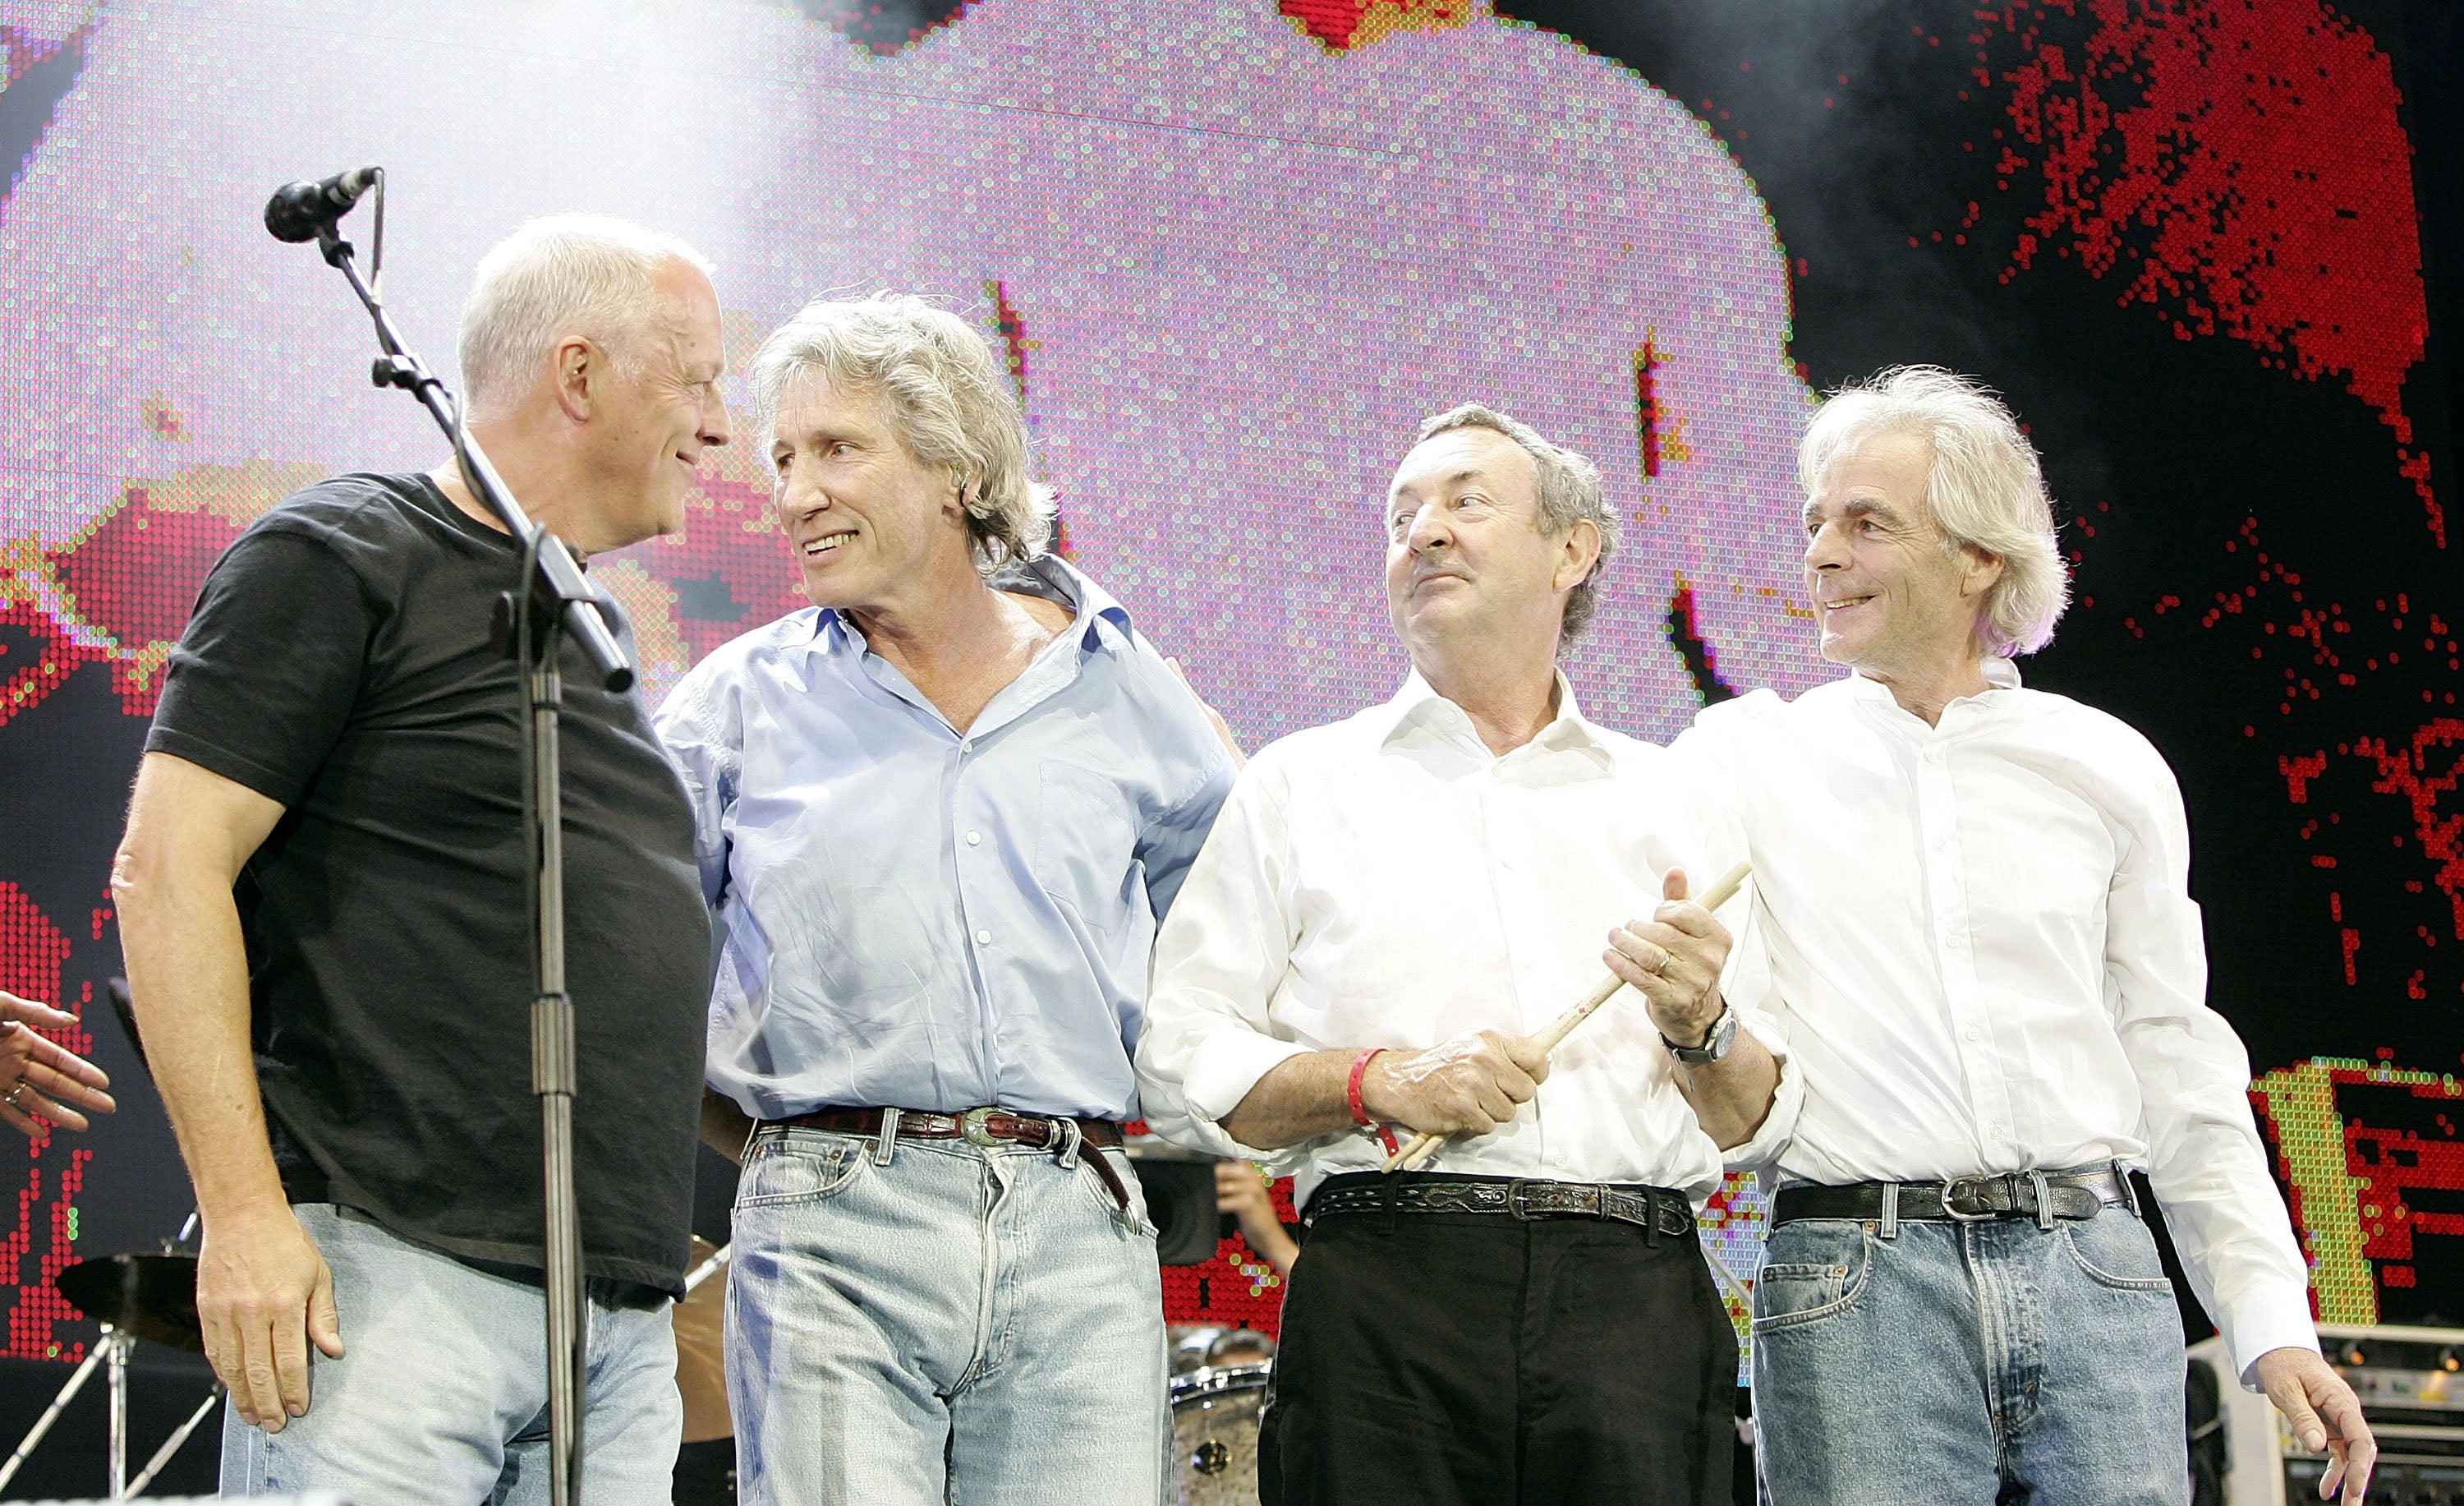 David Gilmour and Roger Waters reunited for Live 8 London in 2005